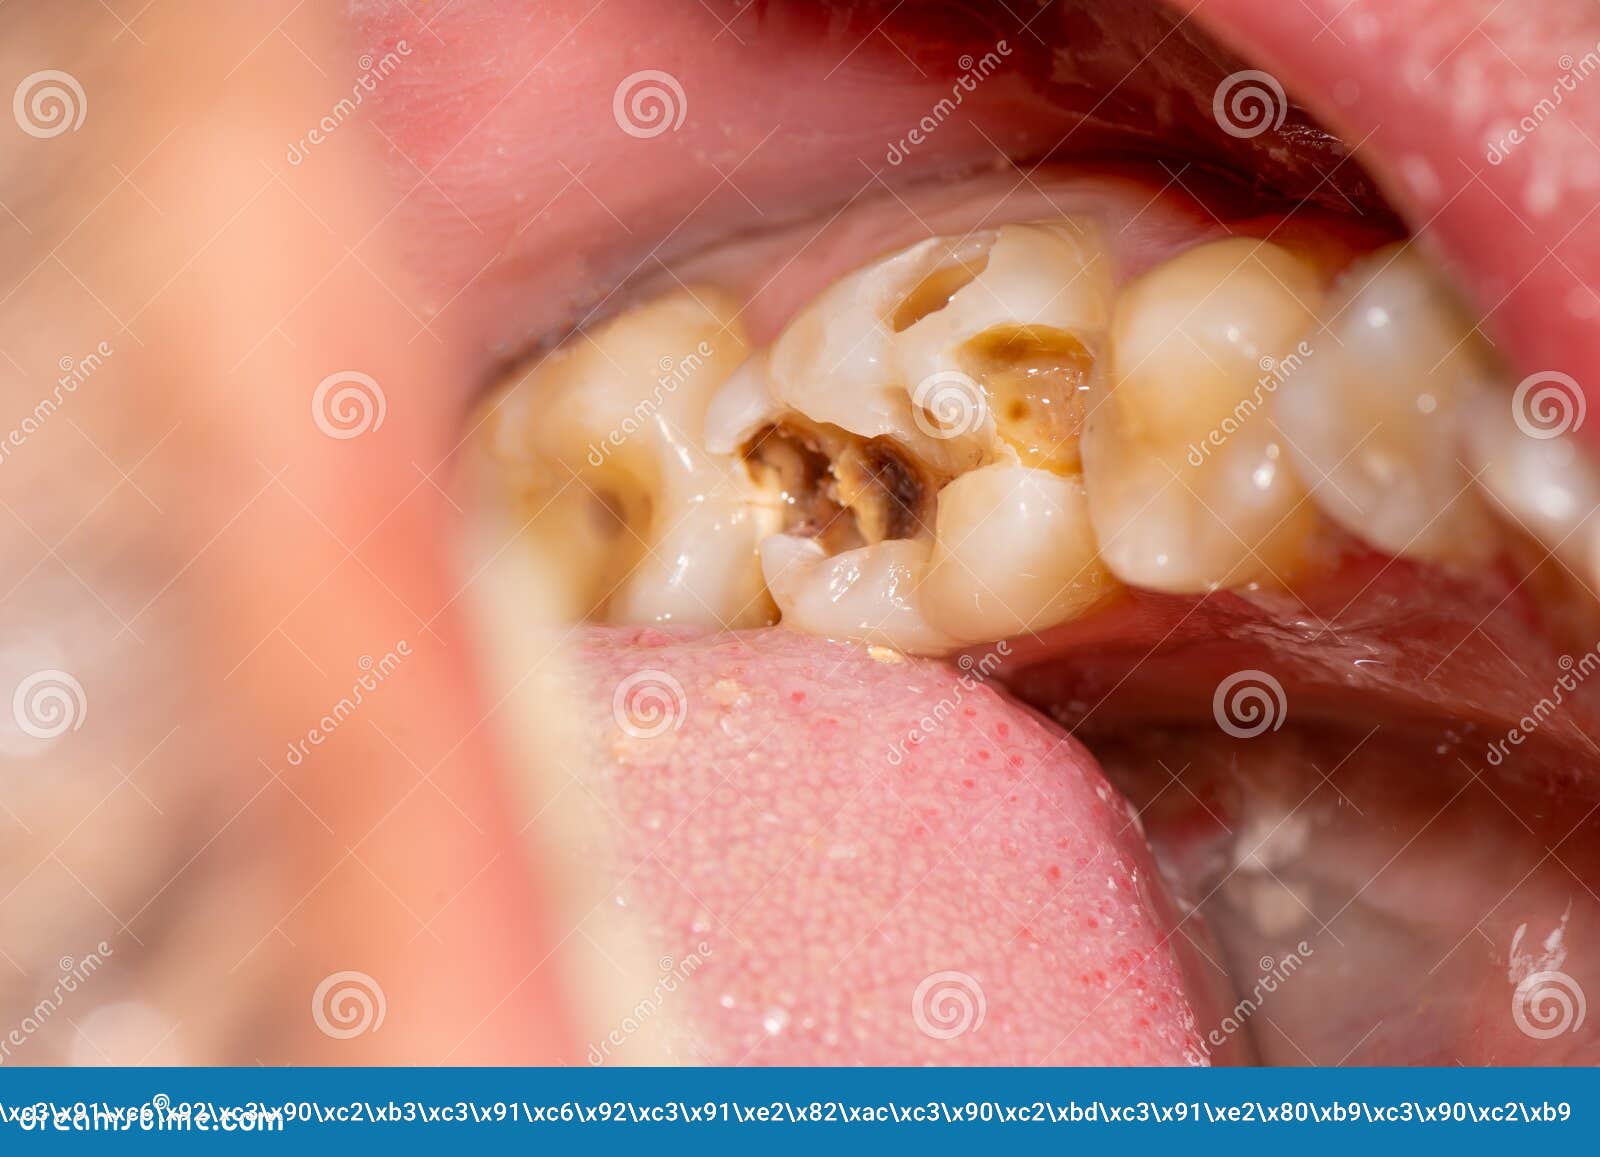 treatment of tooth decay with subsequent filling with photopolymer material. close-up, macro